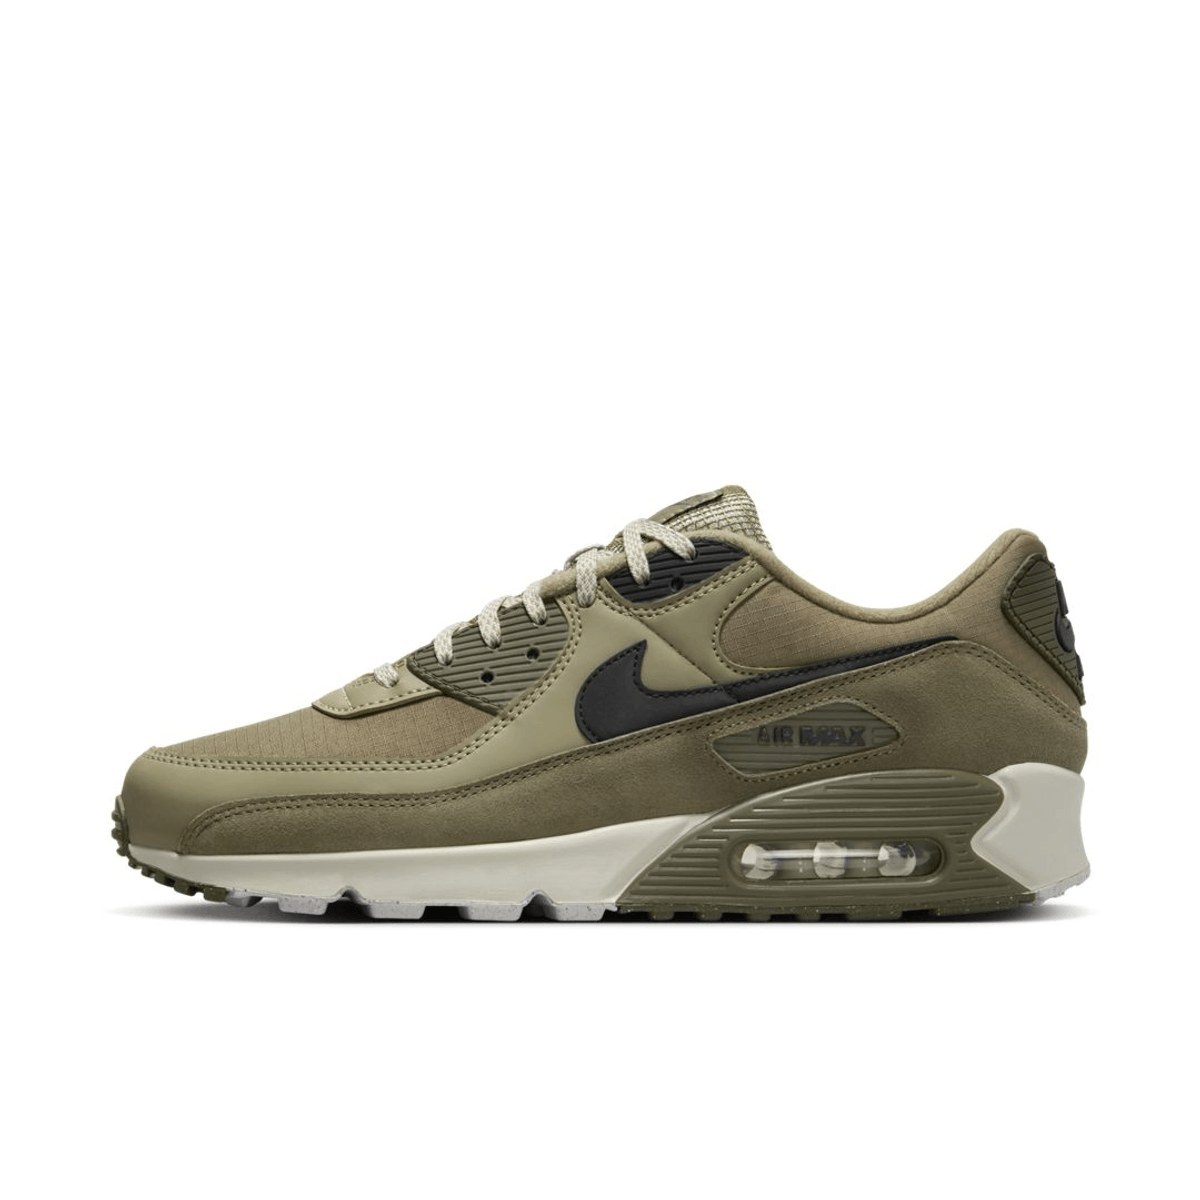 Official Look At The Nike Air Max 90 "Neutral Olive"